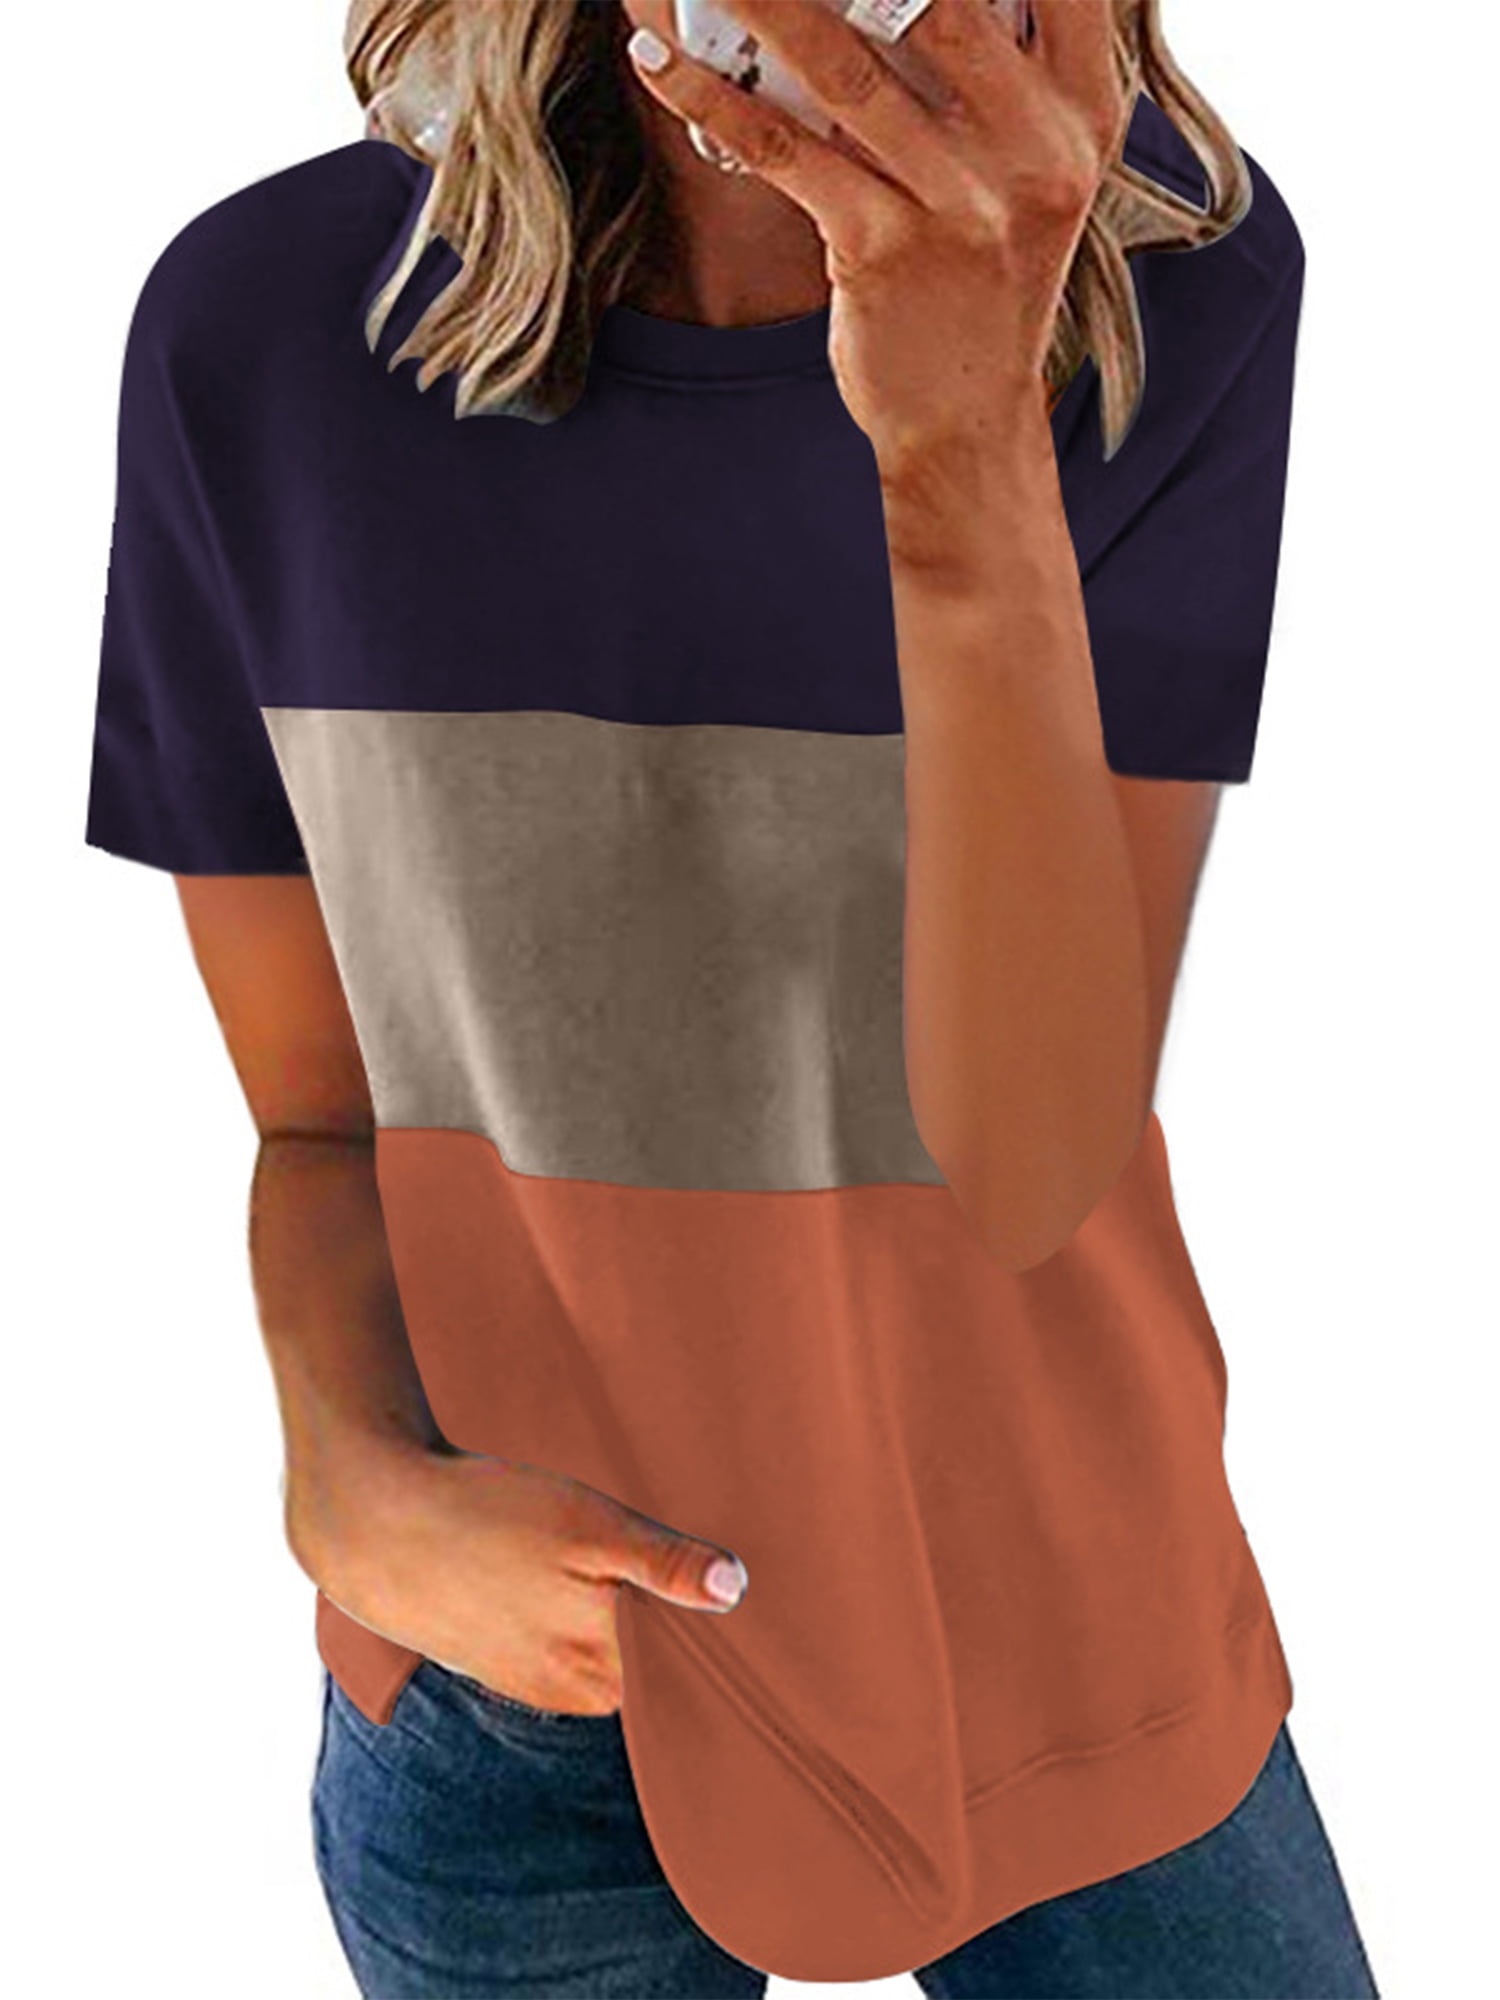 MASZONE Crewneck Sweatshirts for Women Button up Color Block Splicing Pullover Shirts Casual Loose Plus Size Tunic Tops 